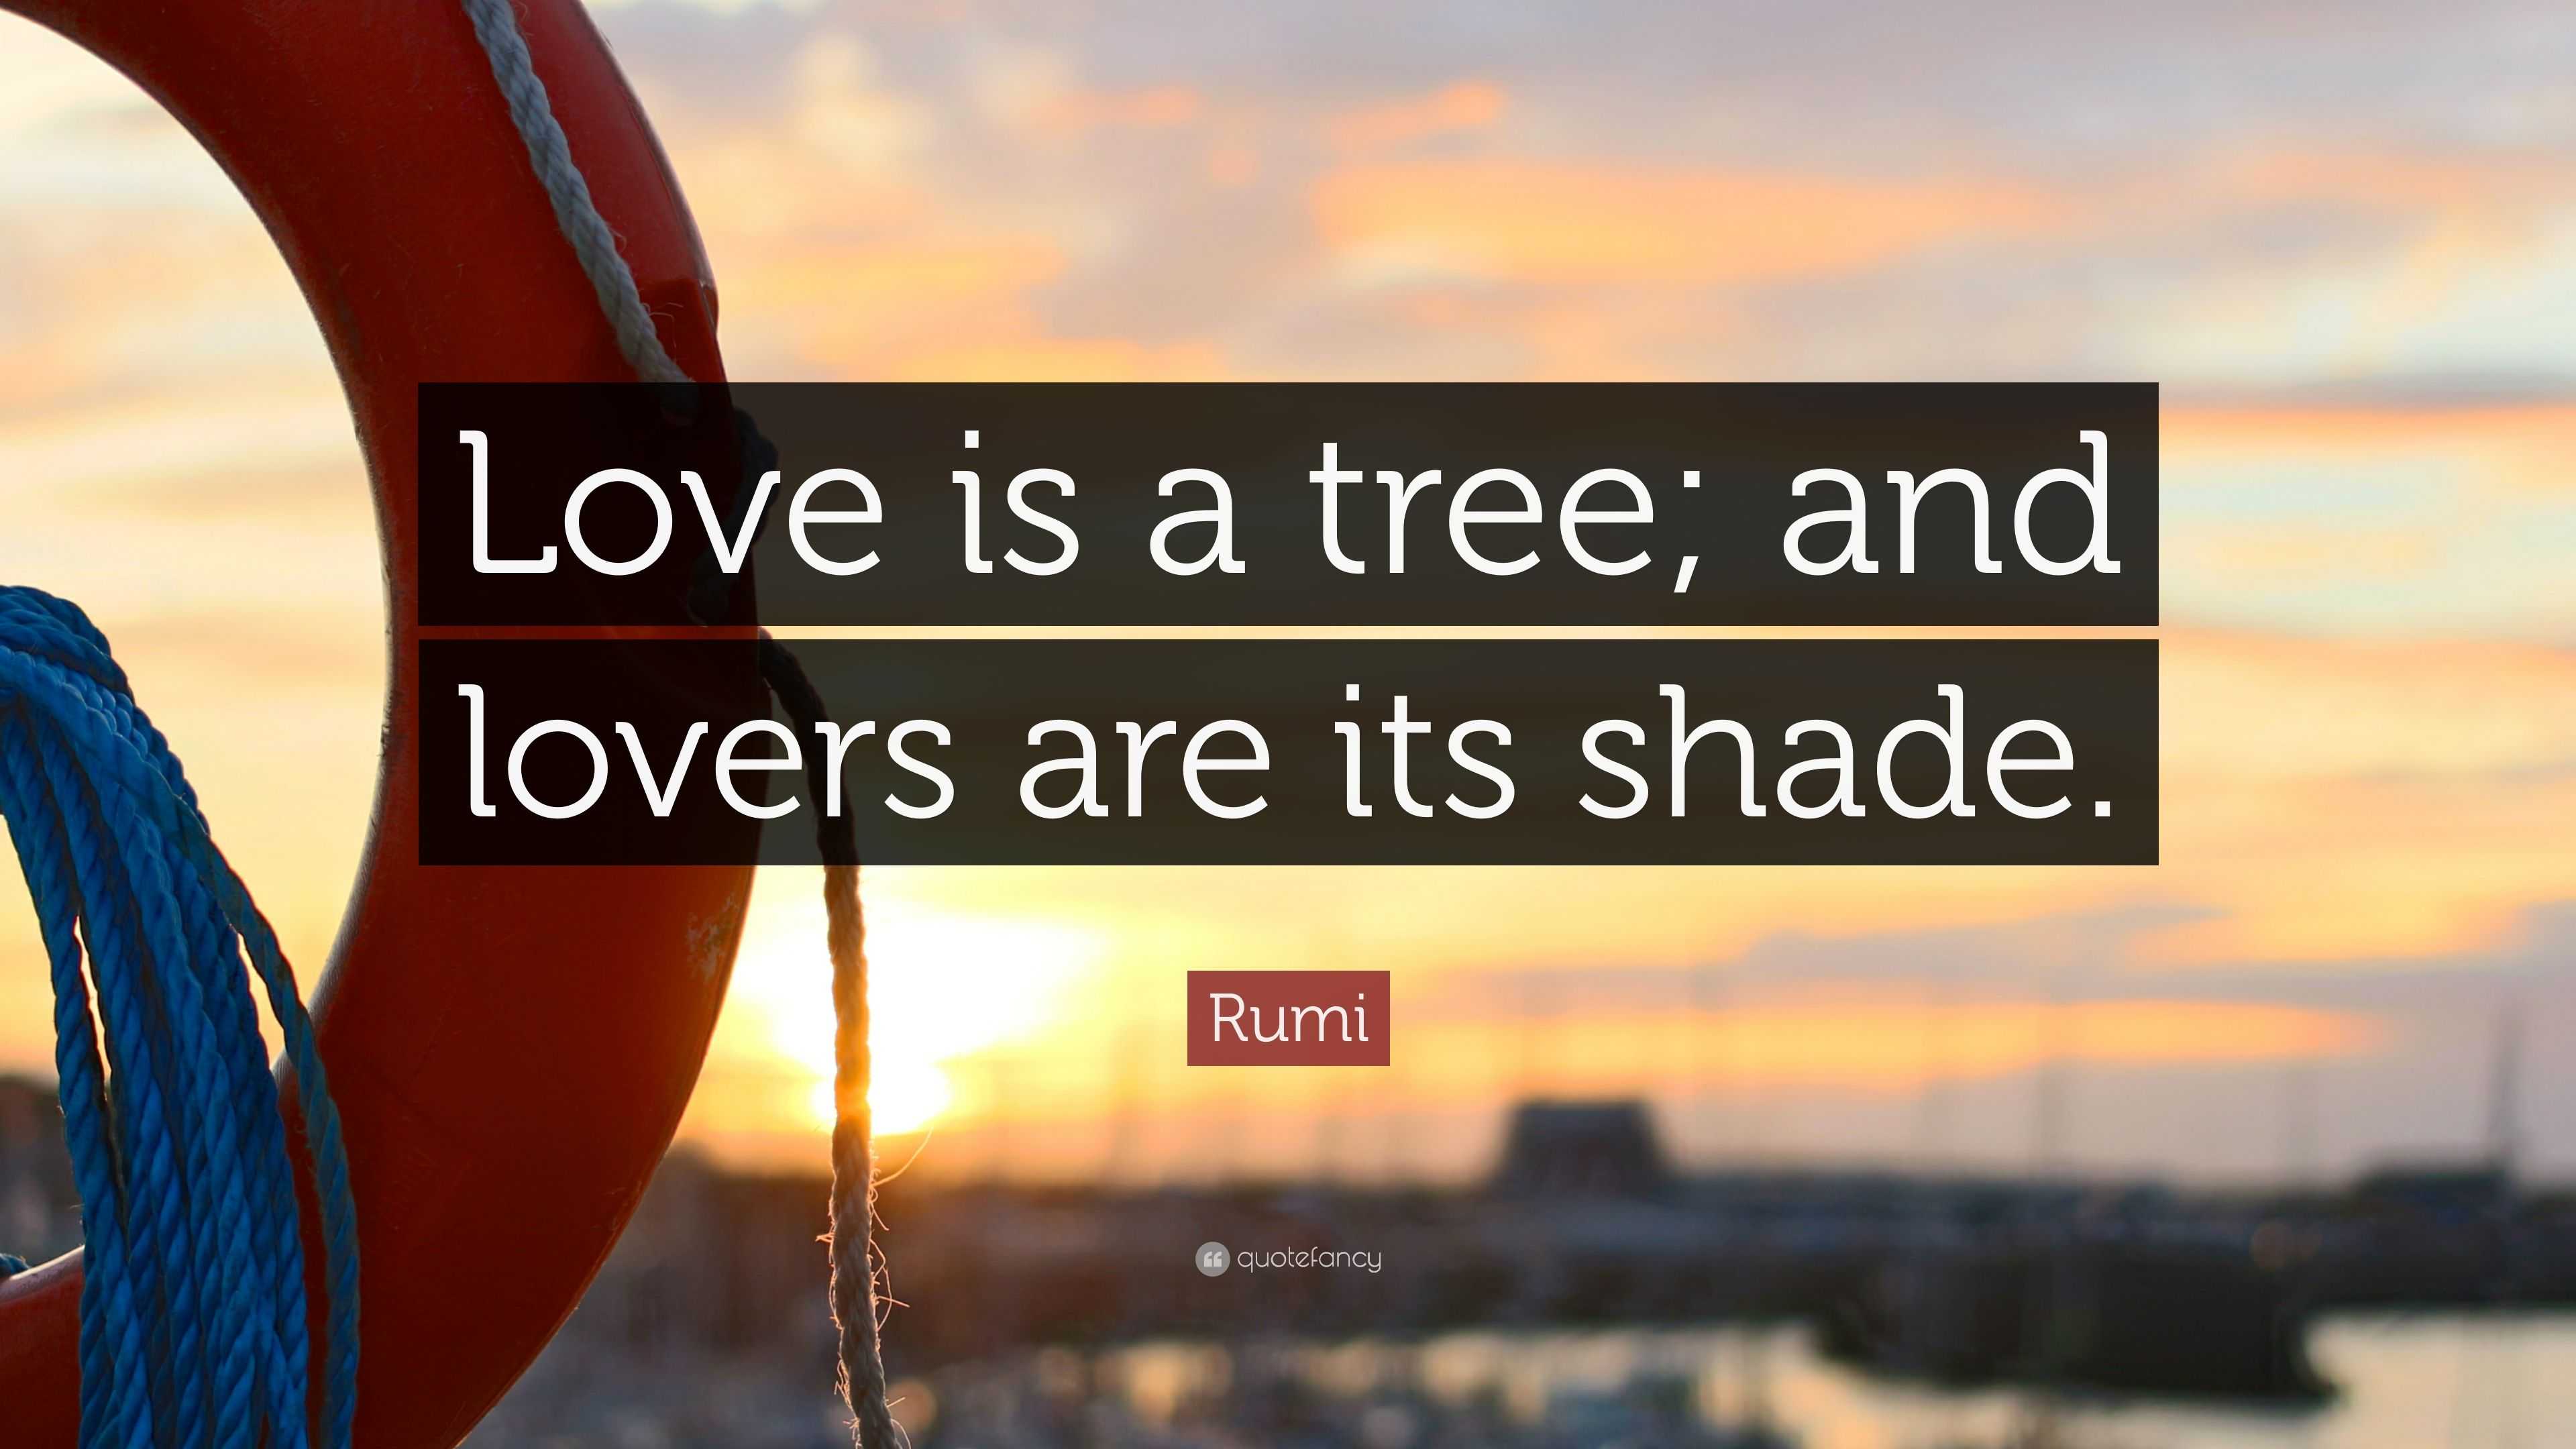 Rumi Quote “Love is a tree; and lovers are its shade.”